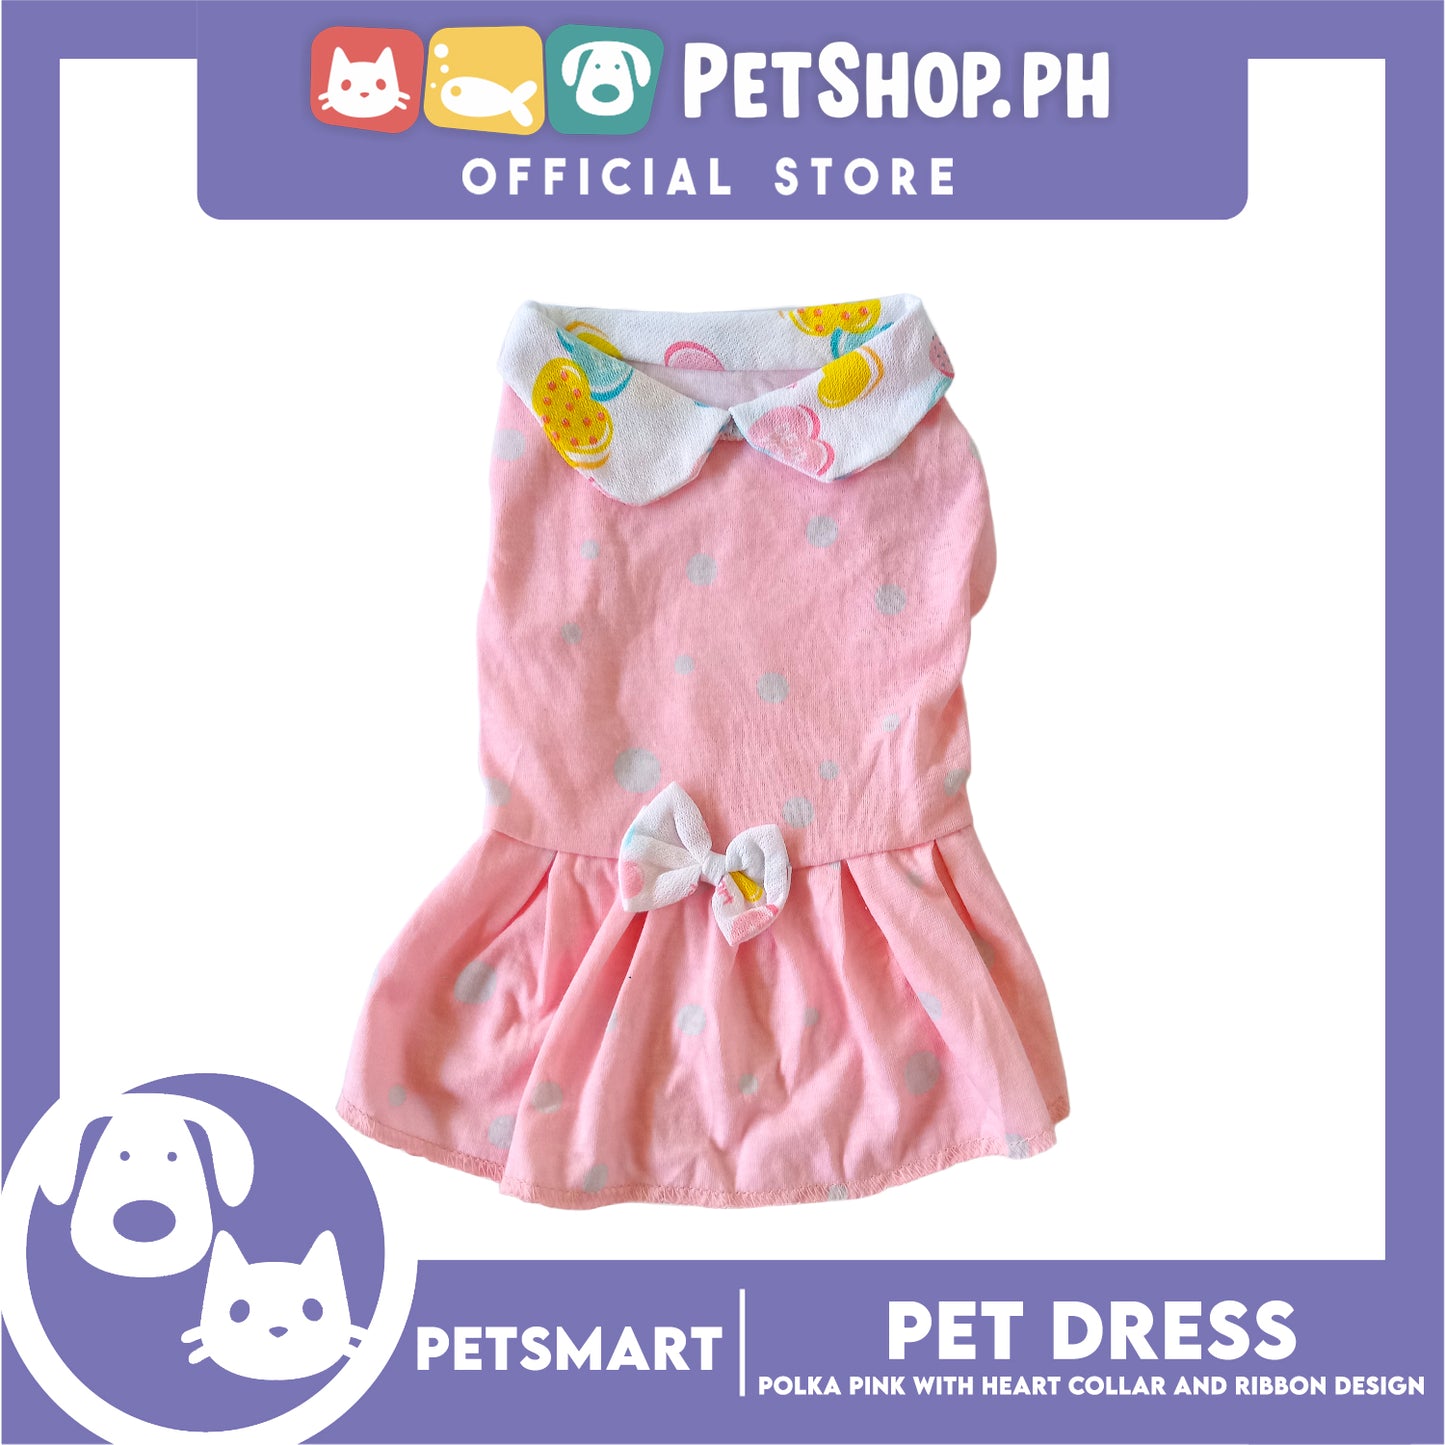 Pet Dress, Polka Pink with Heart Collar and Ribbon Design DG-CTN158XL (XL) Perfect Fit For Dogs And Cats, Pet Clothes, Soft and Comfortable Pet Clothing